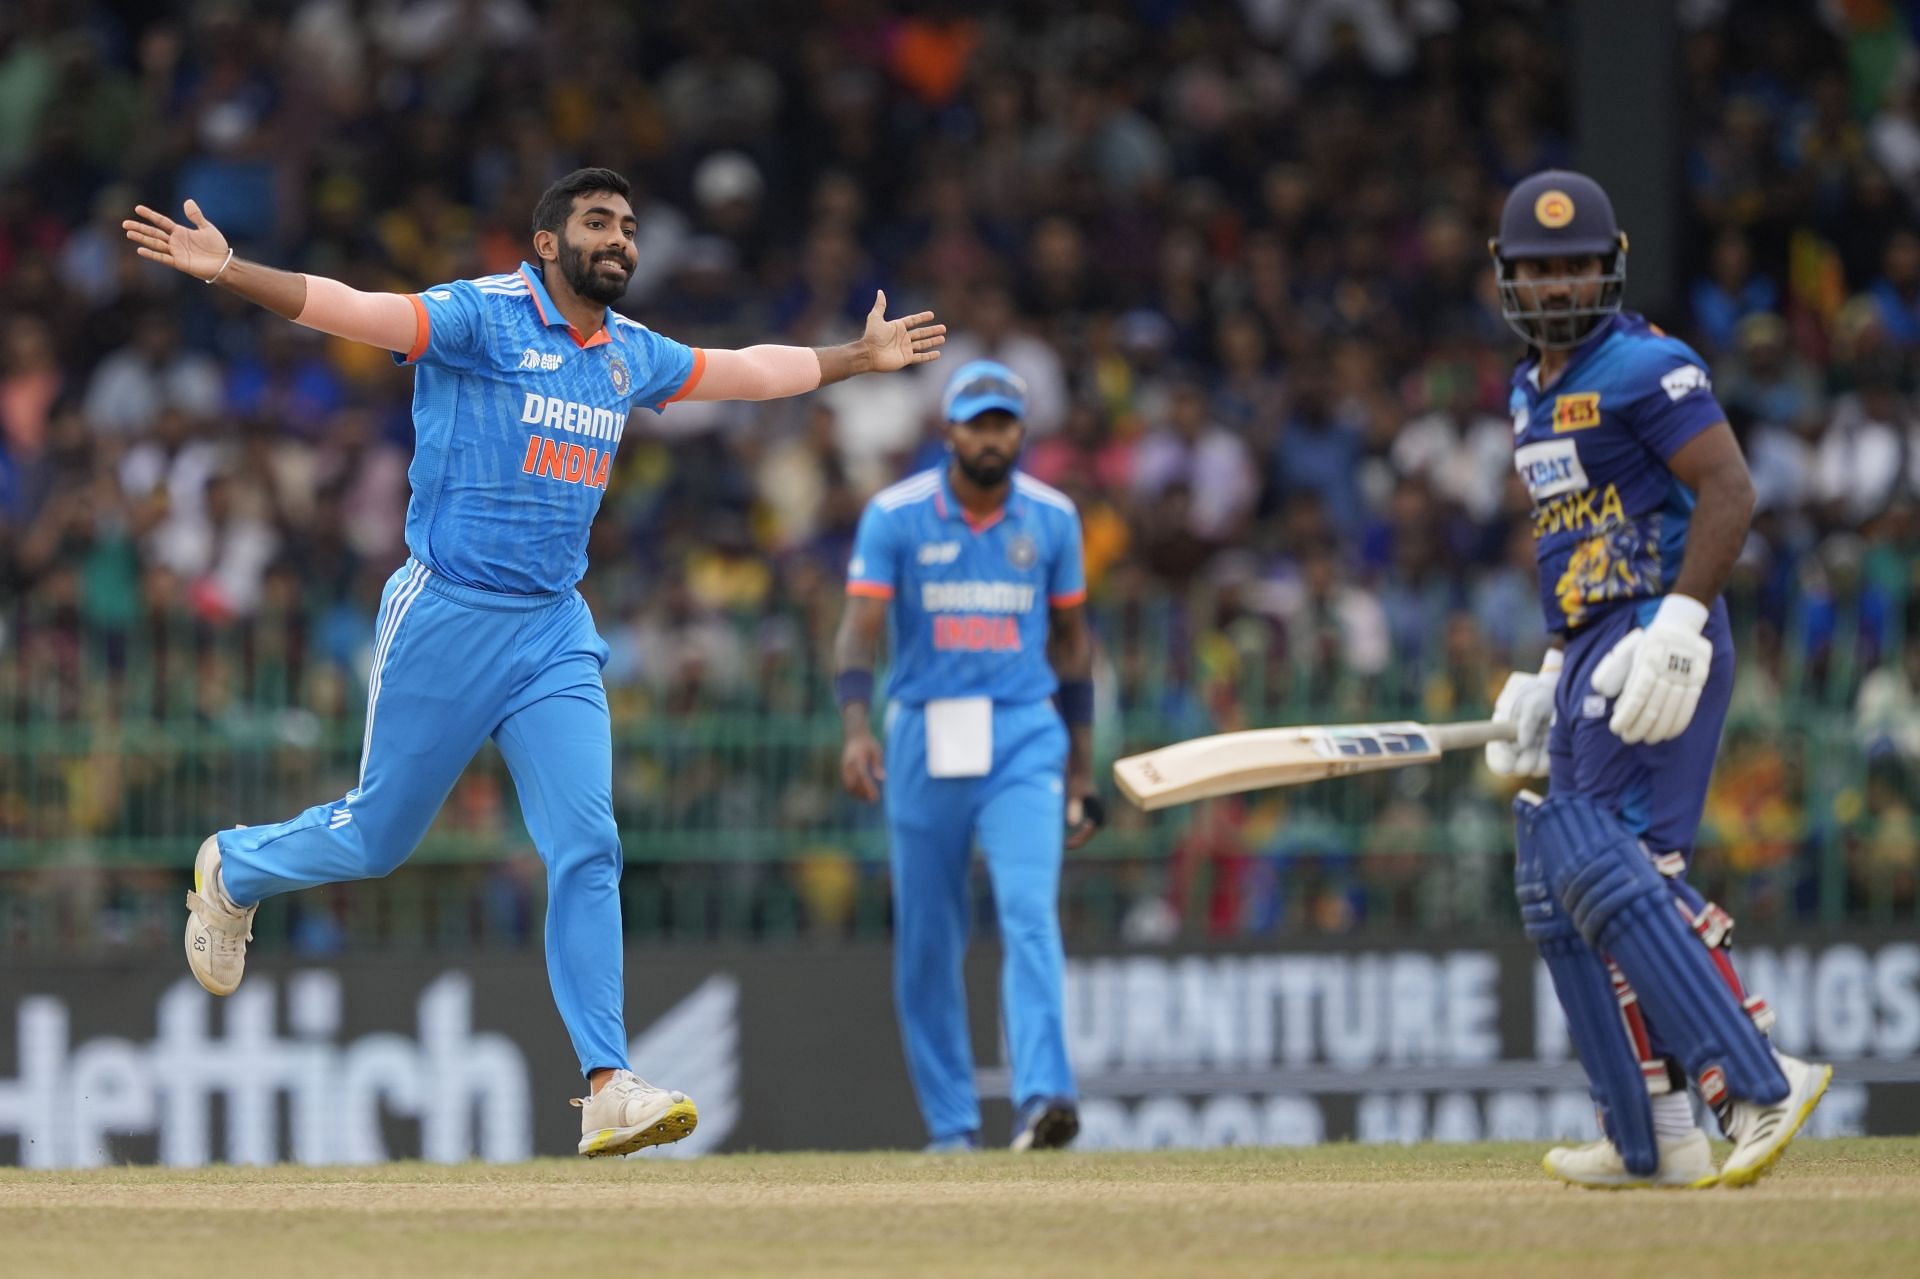 Jasprit Bumrah is expected to return for the third ODI